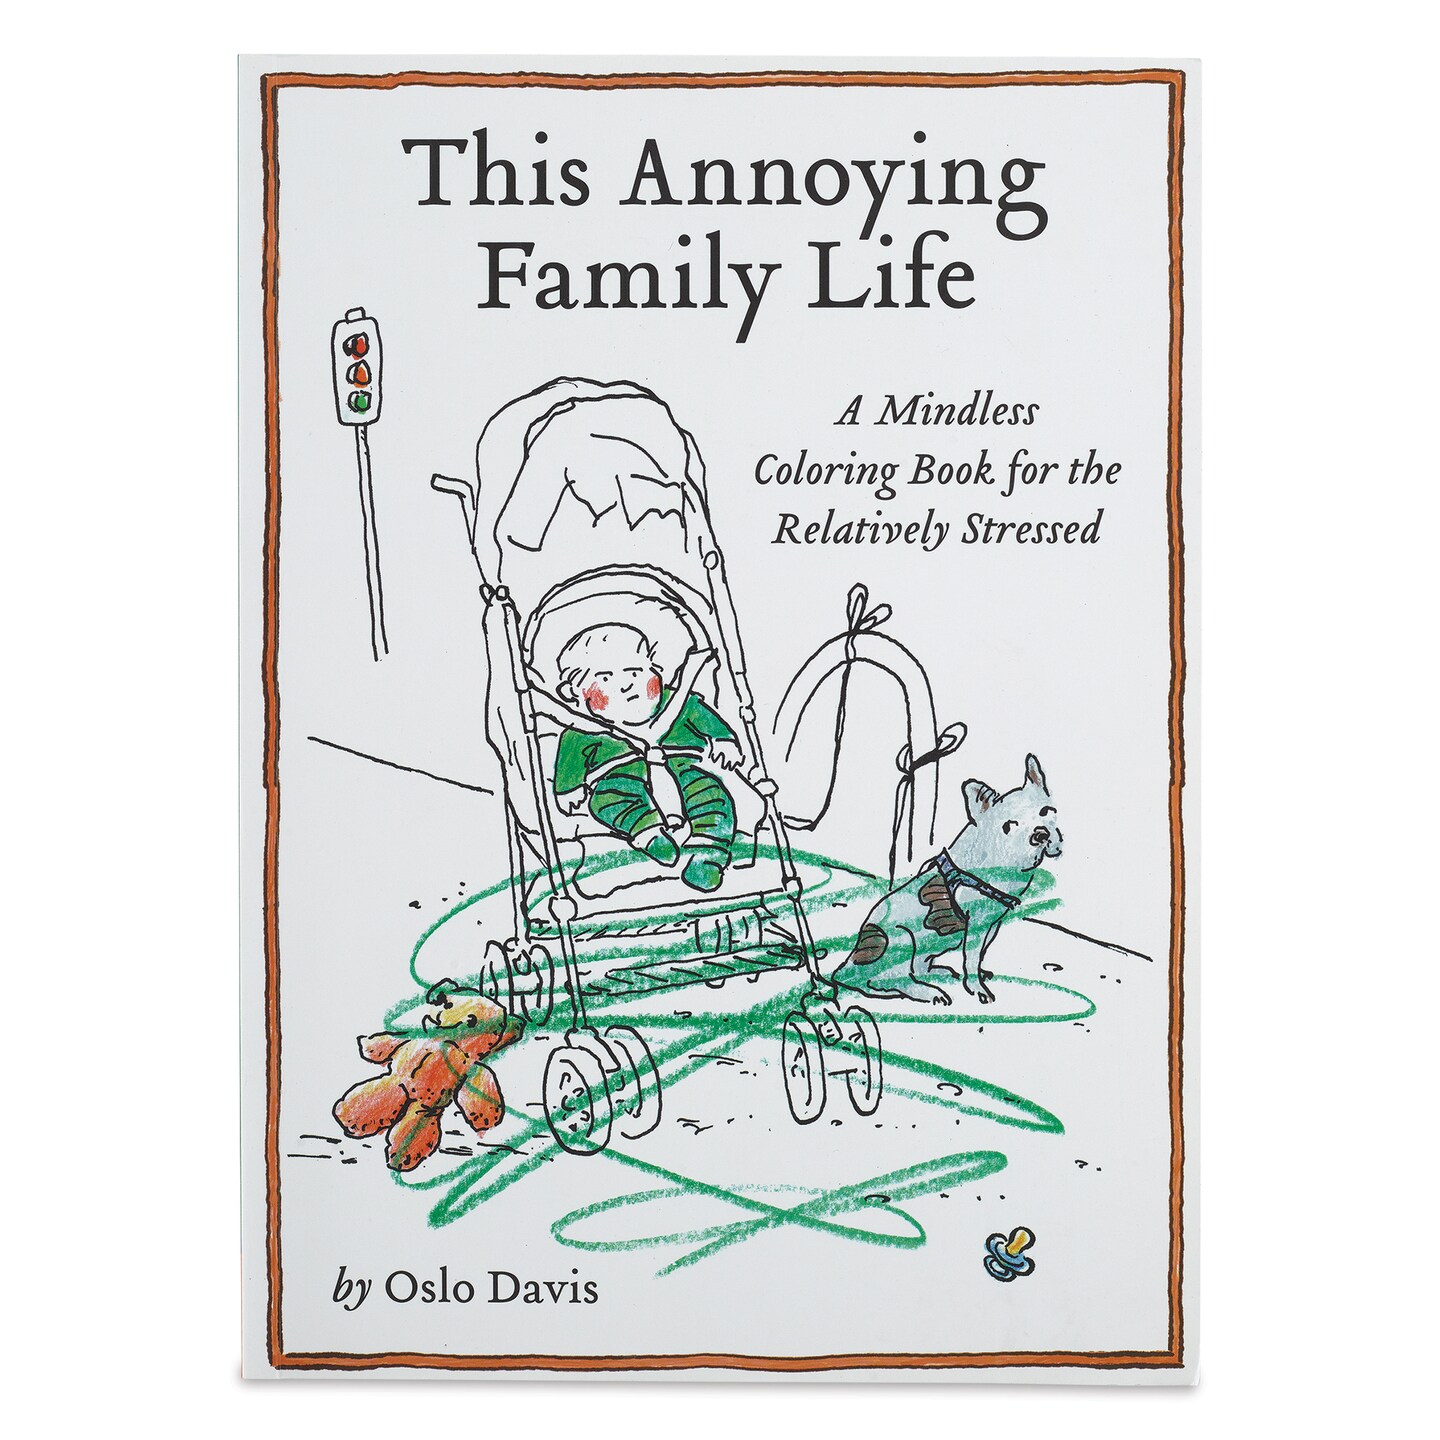 This Annoying Life Coloring Book - This Annoying Family Life